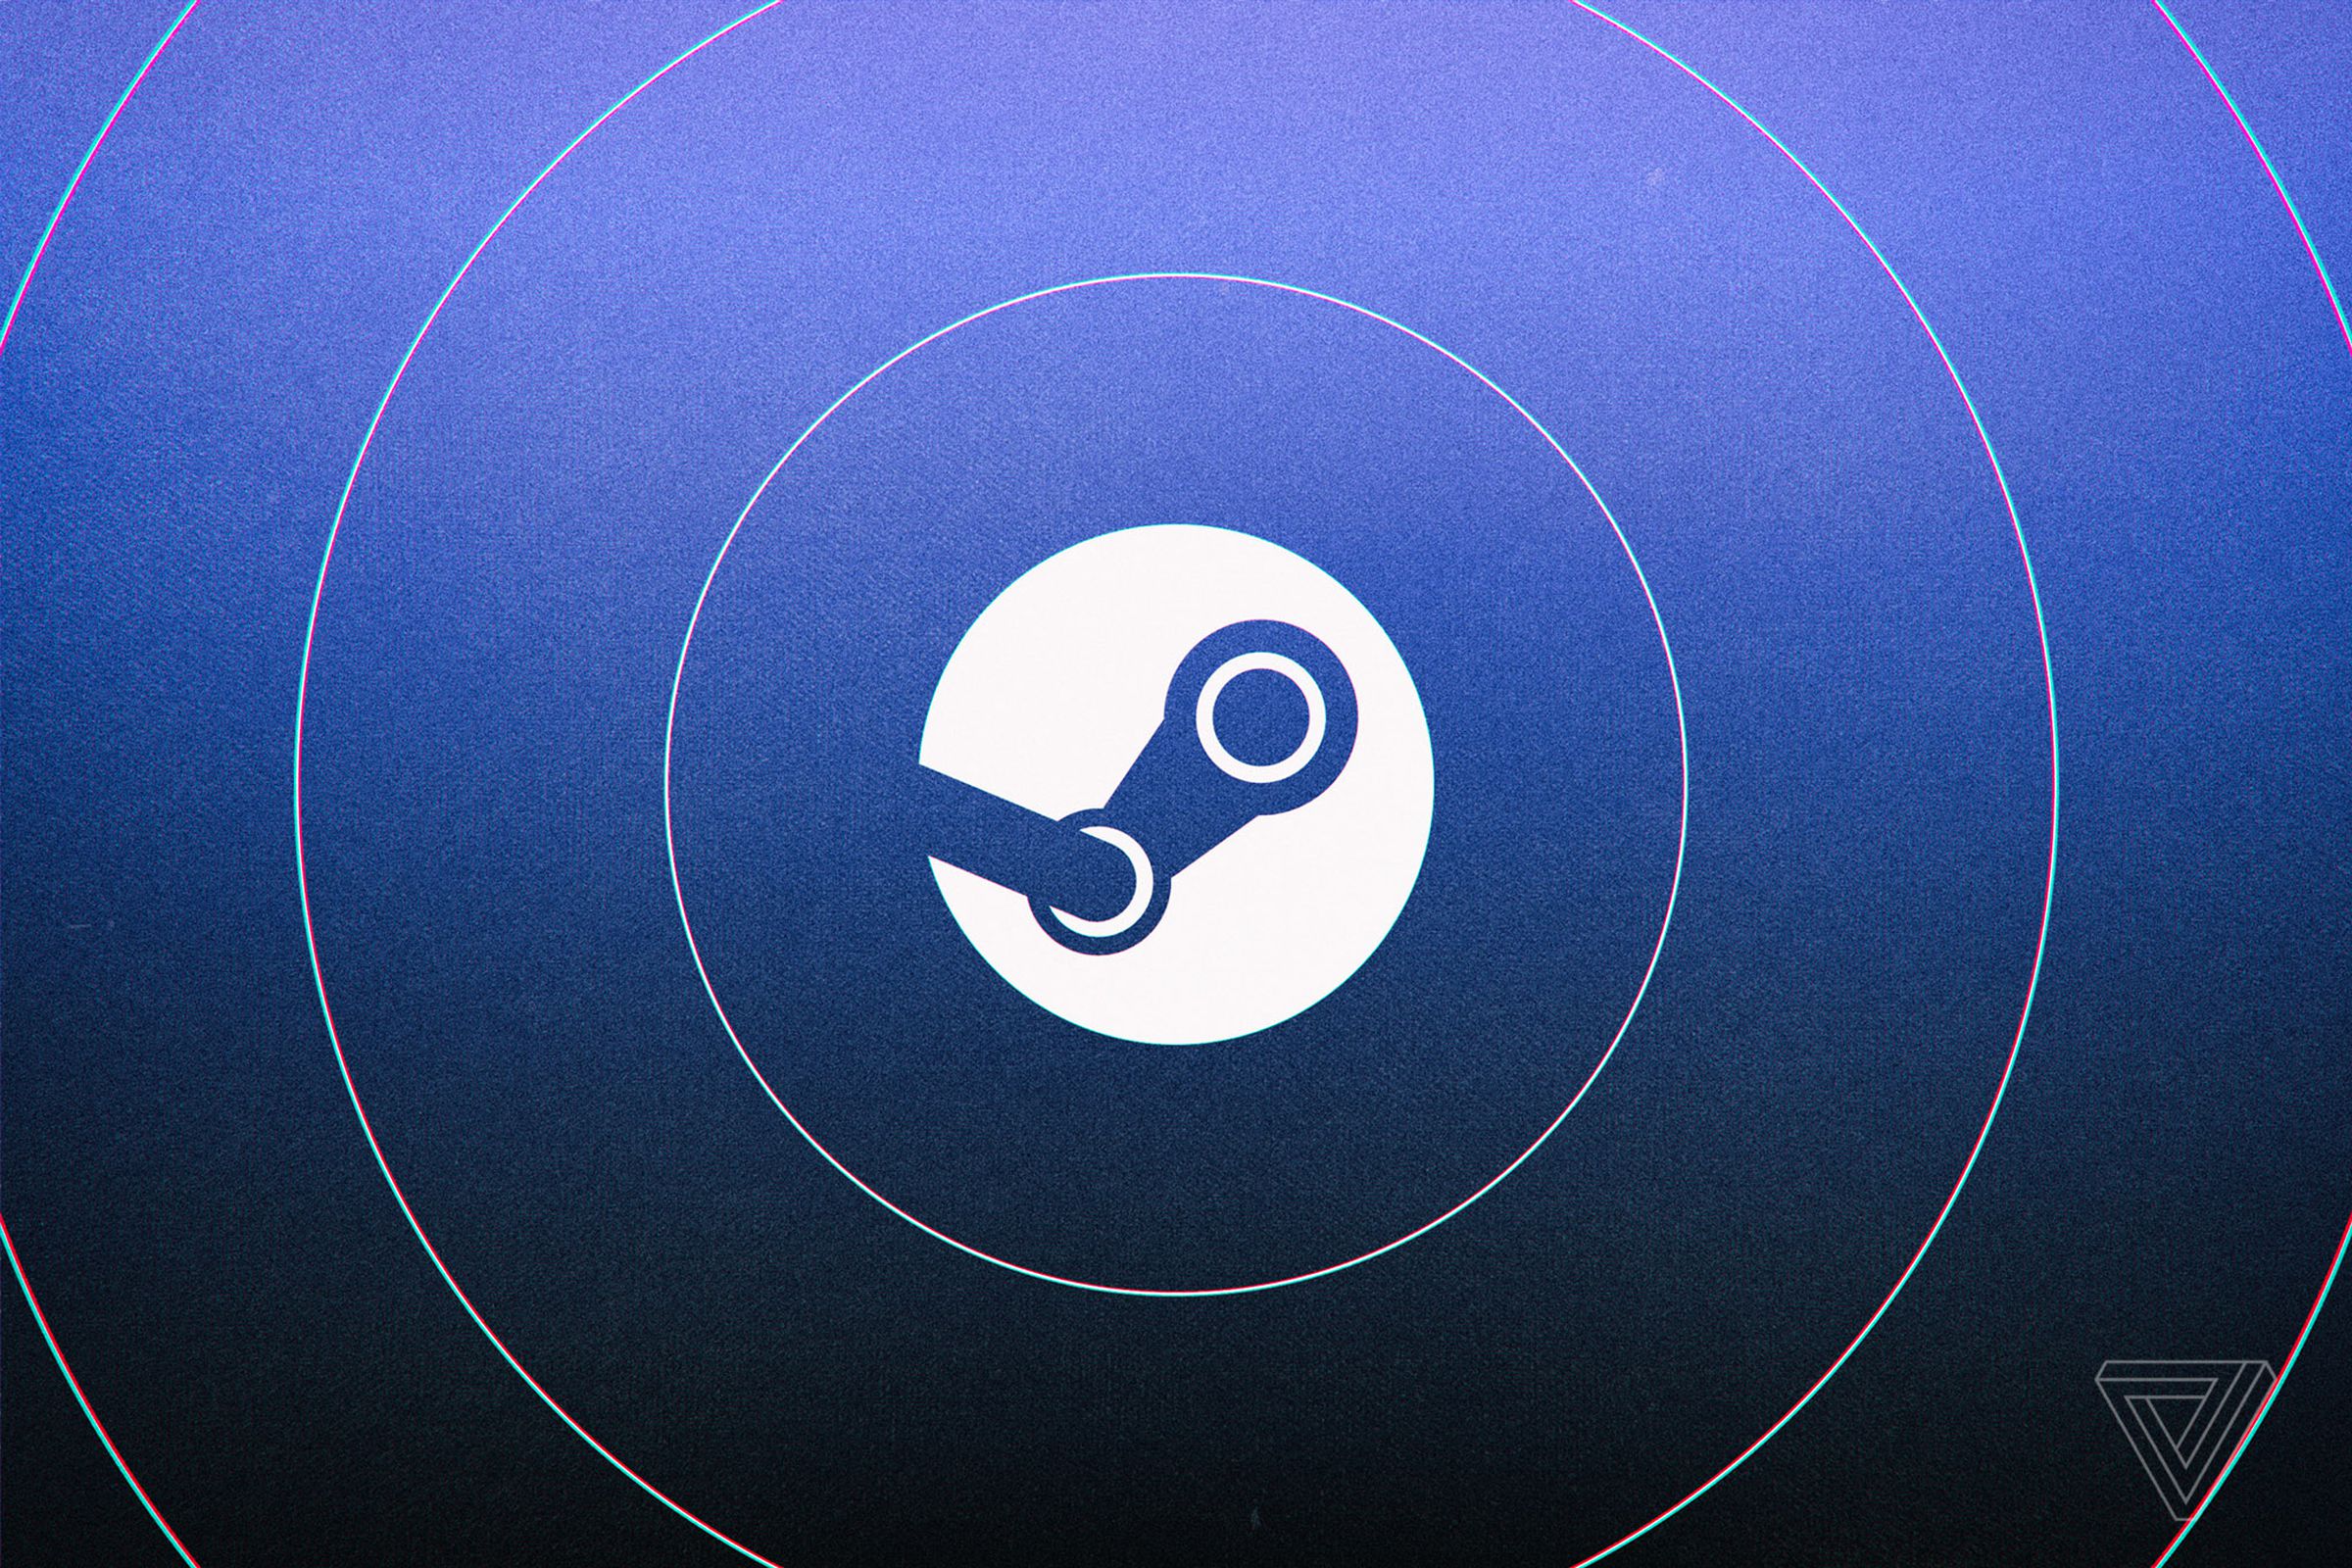 The Steam logo on a blue background. The logo is inside a few larger circles.